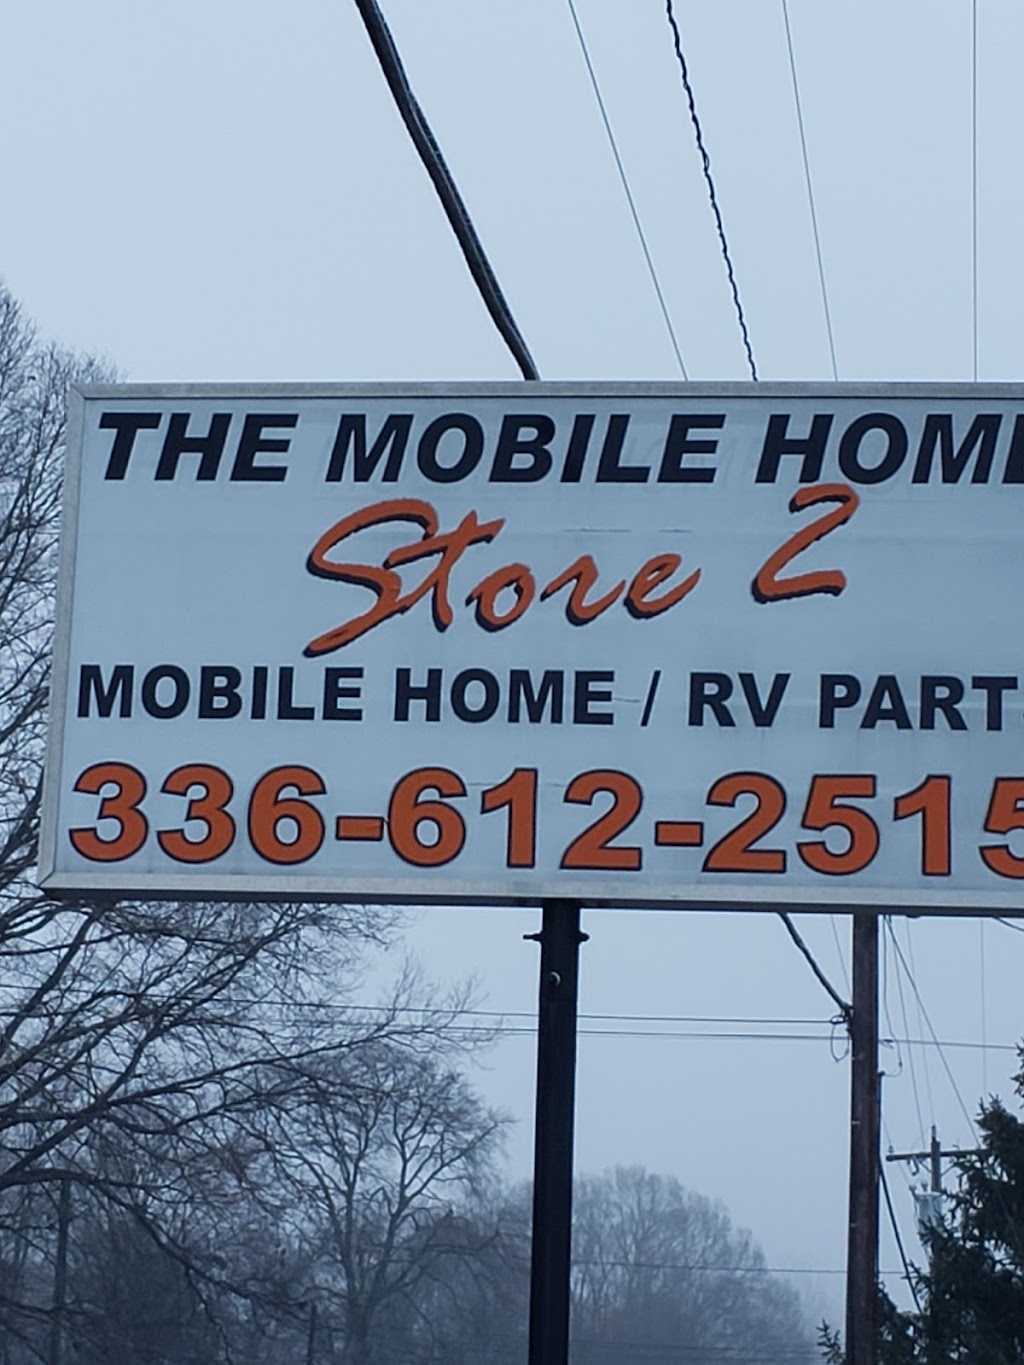 Mobile Home Store | Photo 1 of 3 | Address: 14774 NC-87, Eden, NC 27288, USA | Phone: (336) 612-2515